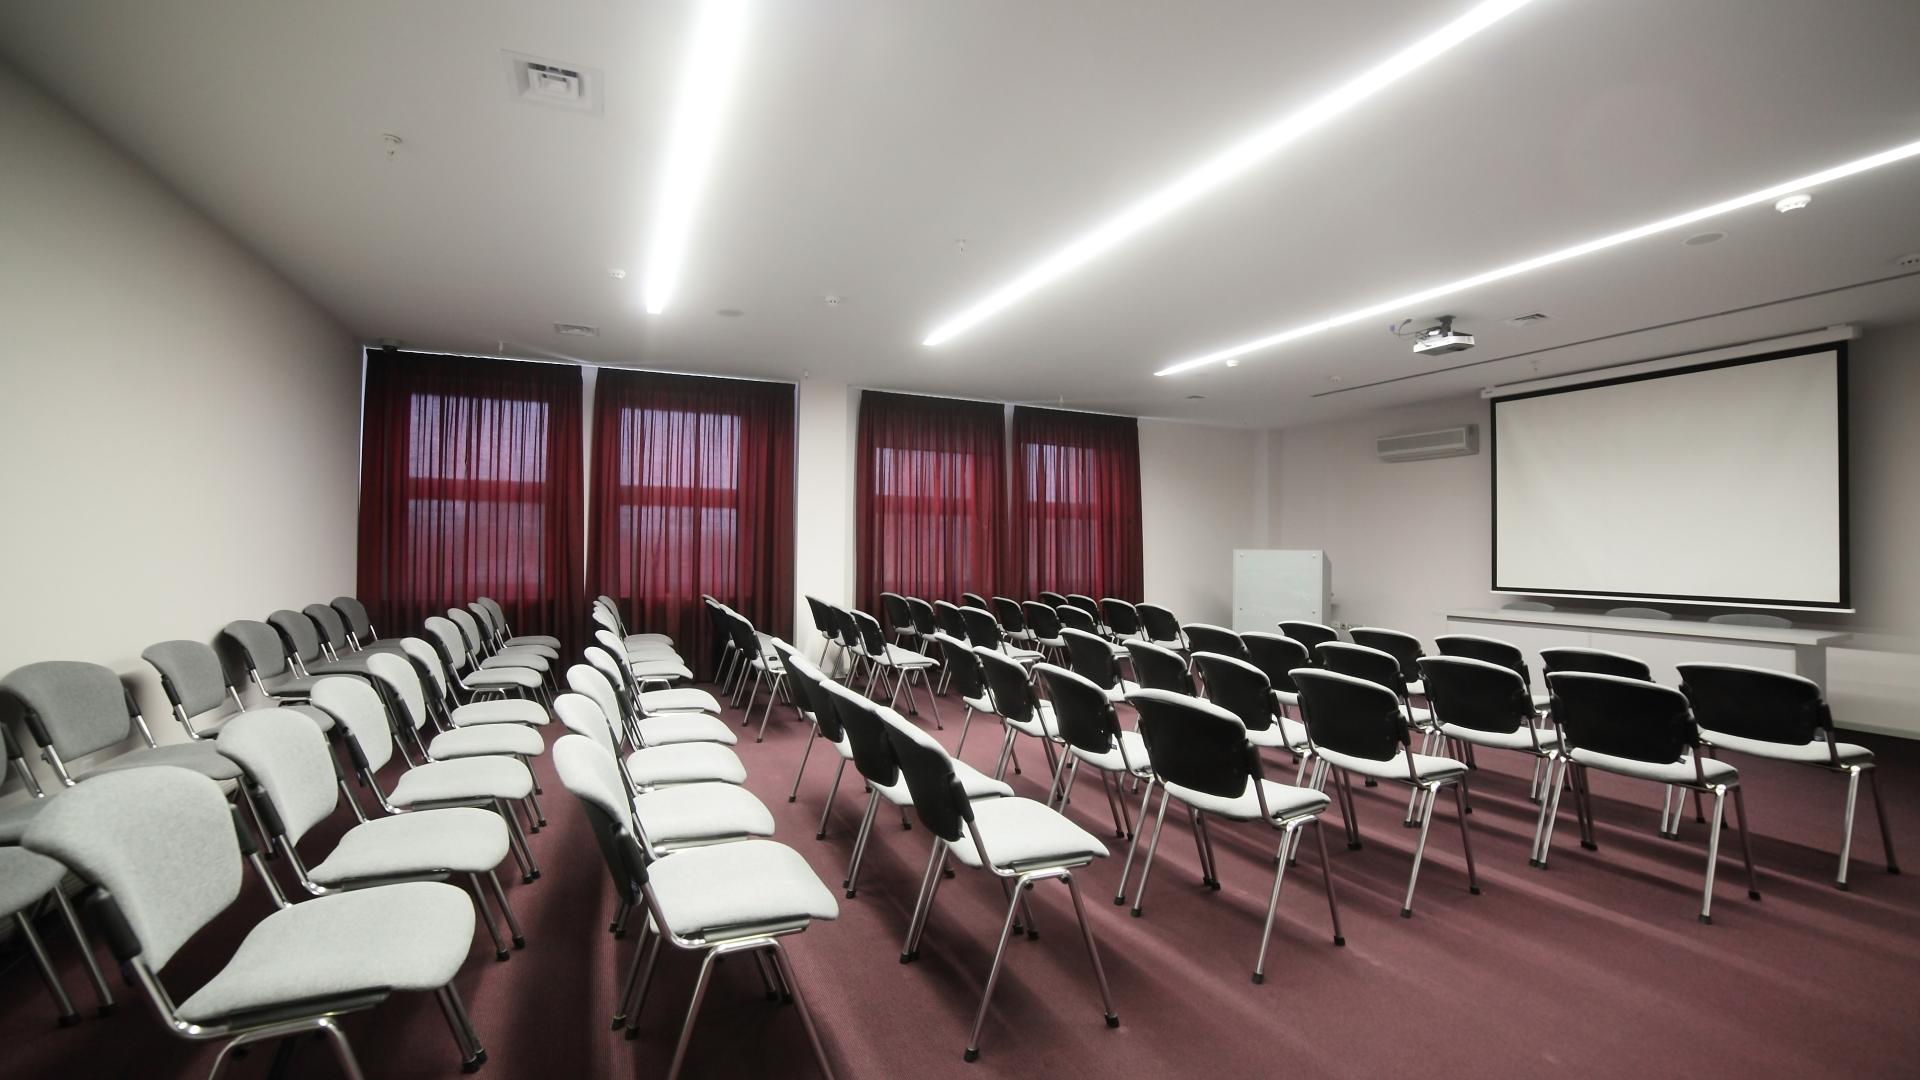 Meeting Rooms for Hire in South East Melbourne